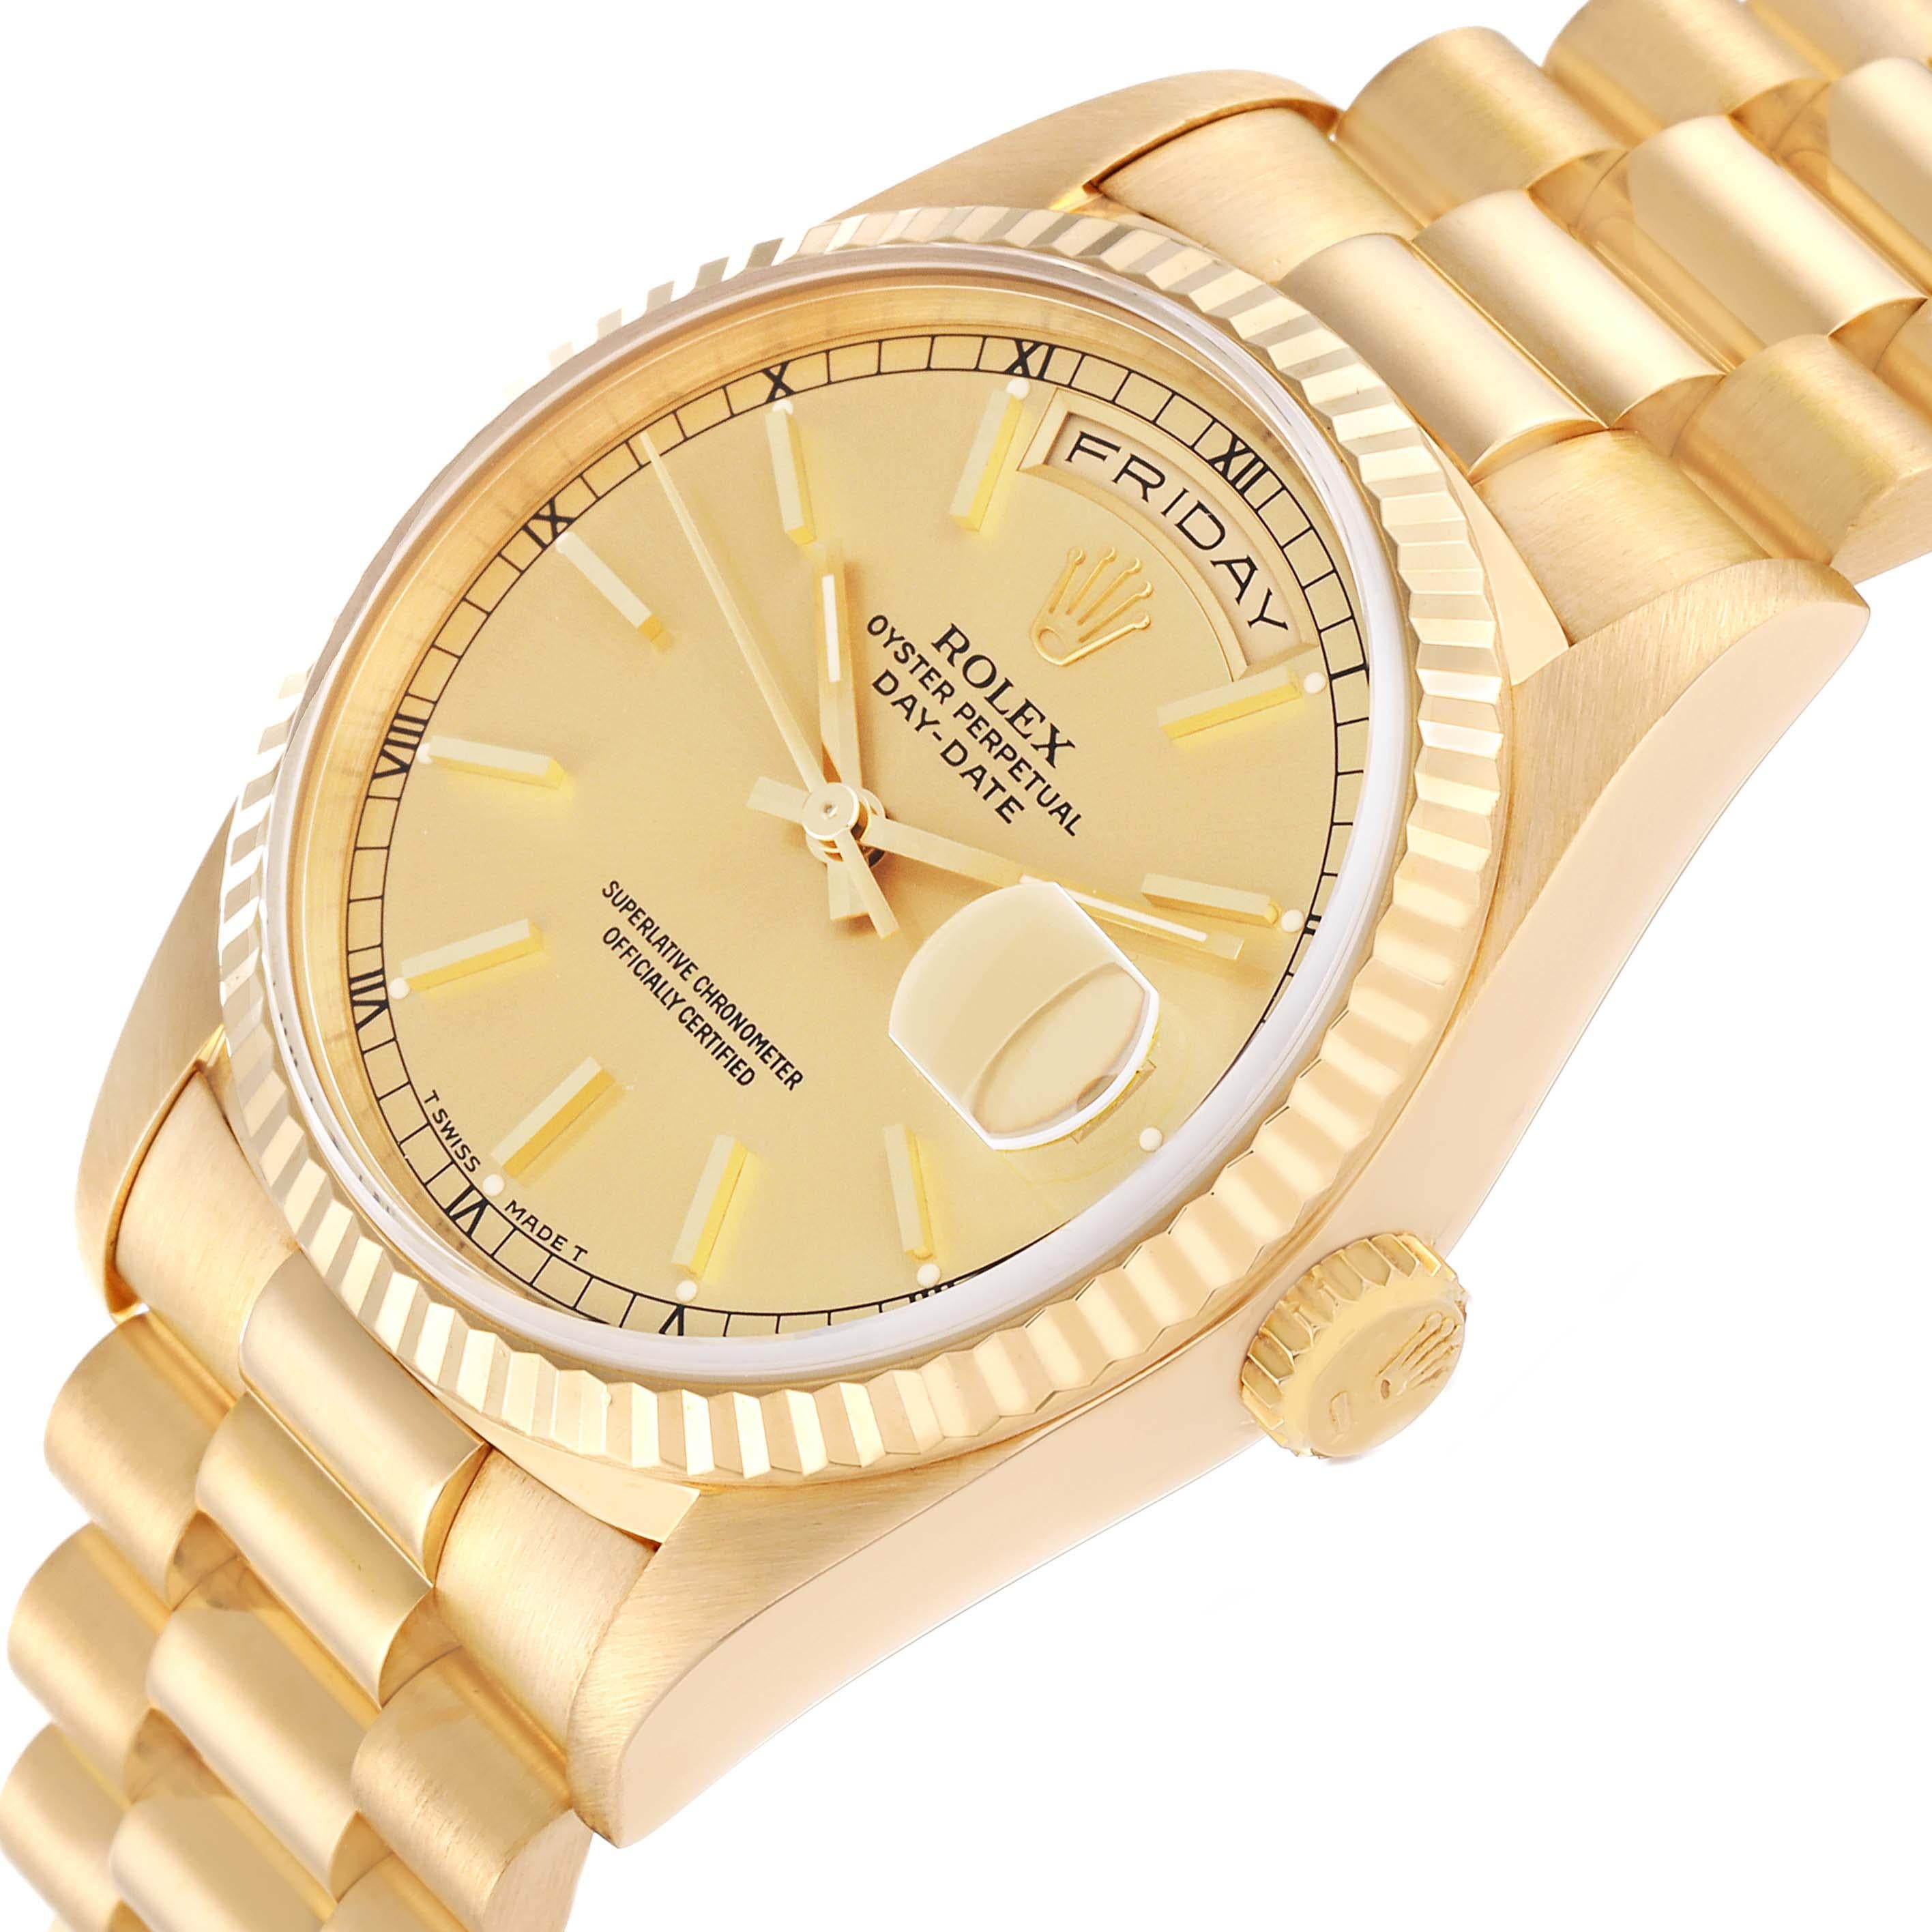 Rolex President Day-Date Yellow Gold Champagne Dial Mens Watch 18238 For Sale 3